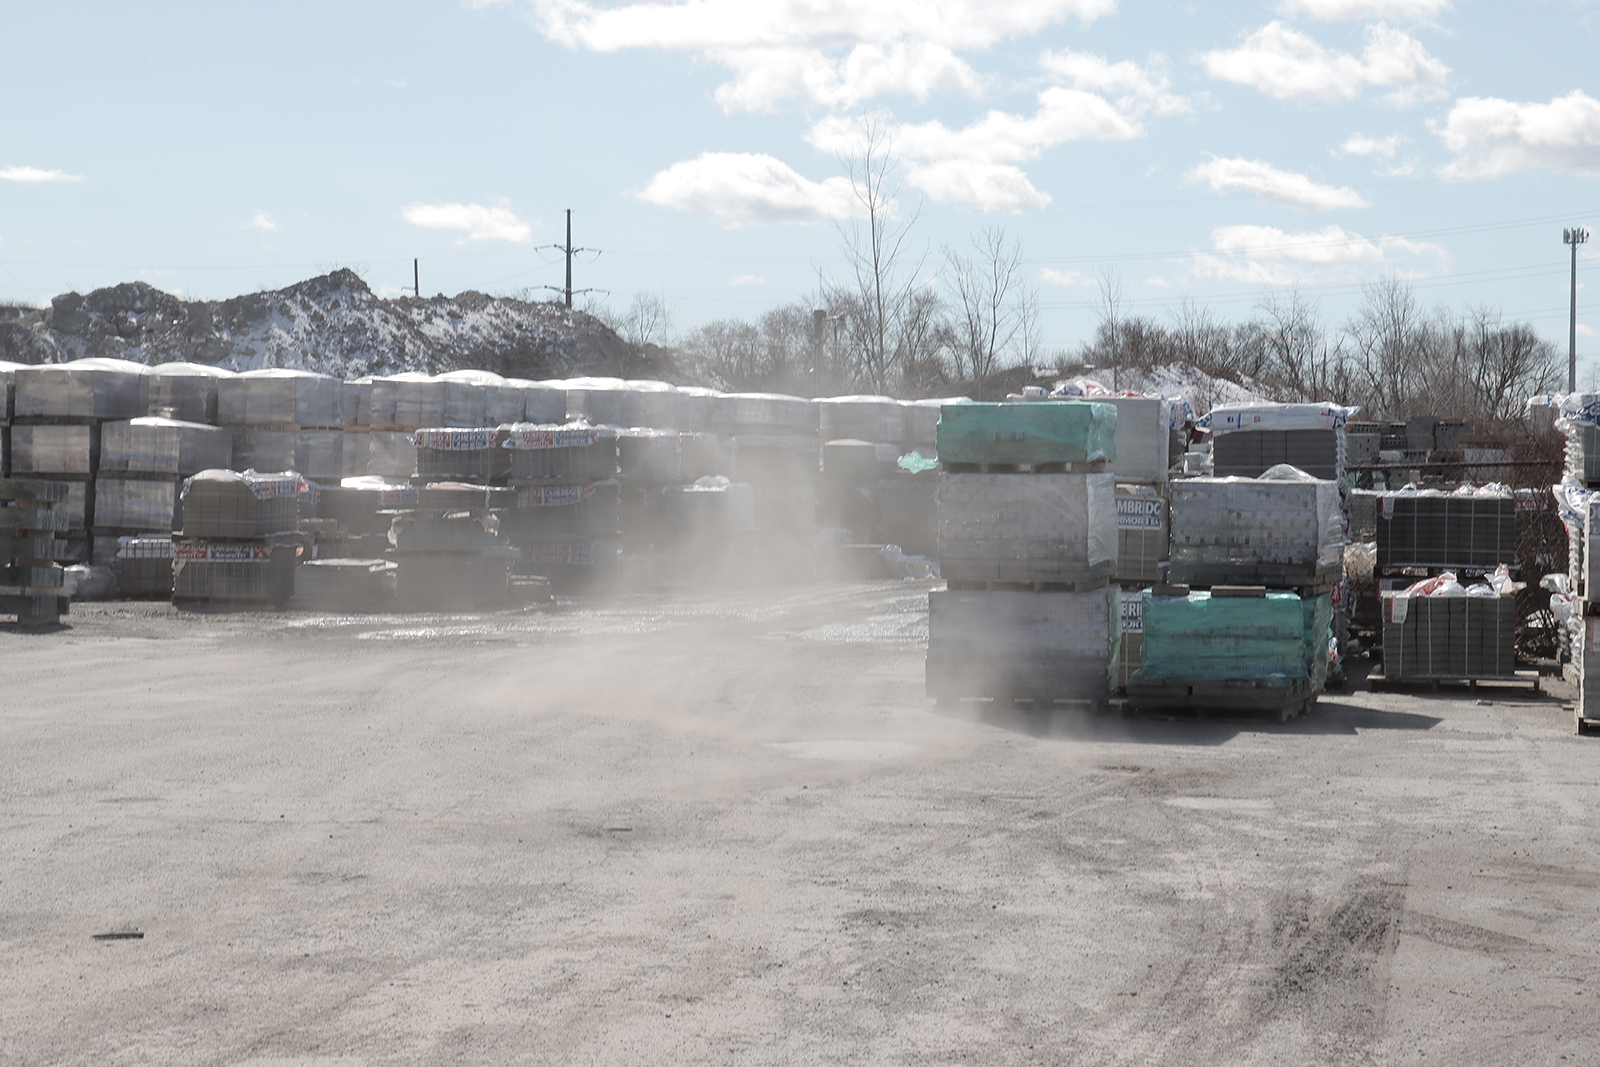 Wind stirs the dust in the parking lot of a concrete supply company